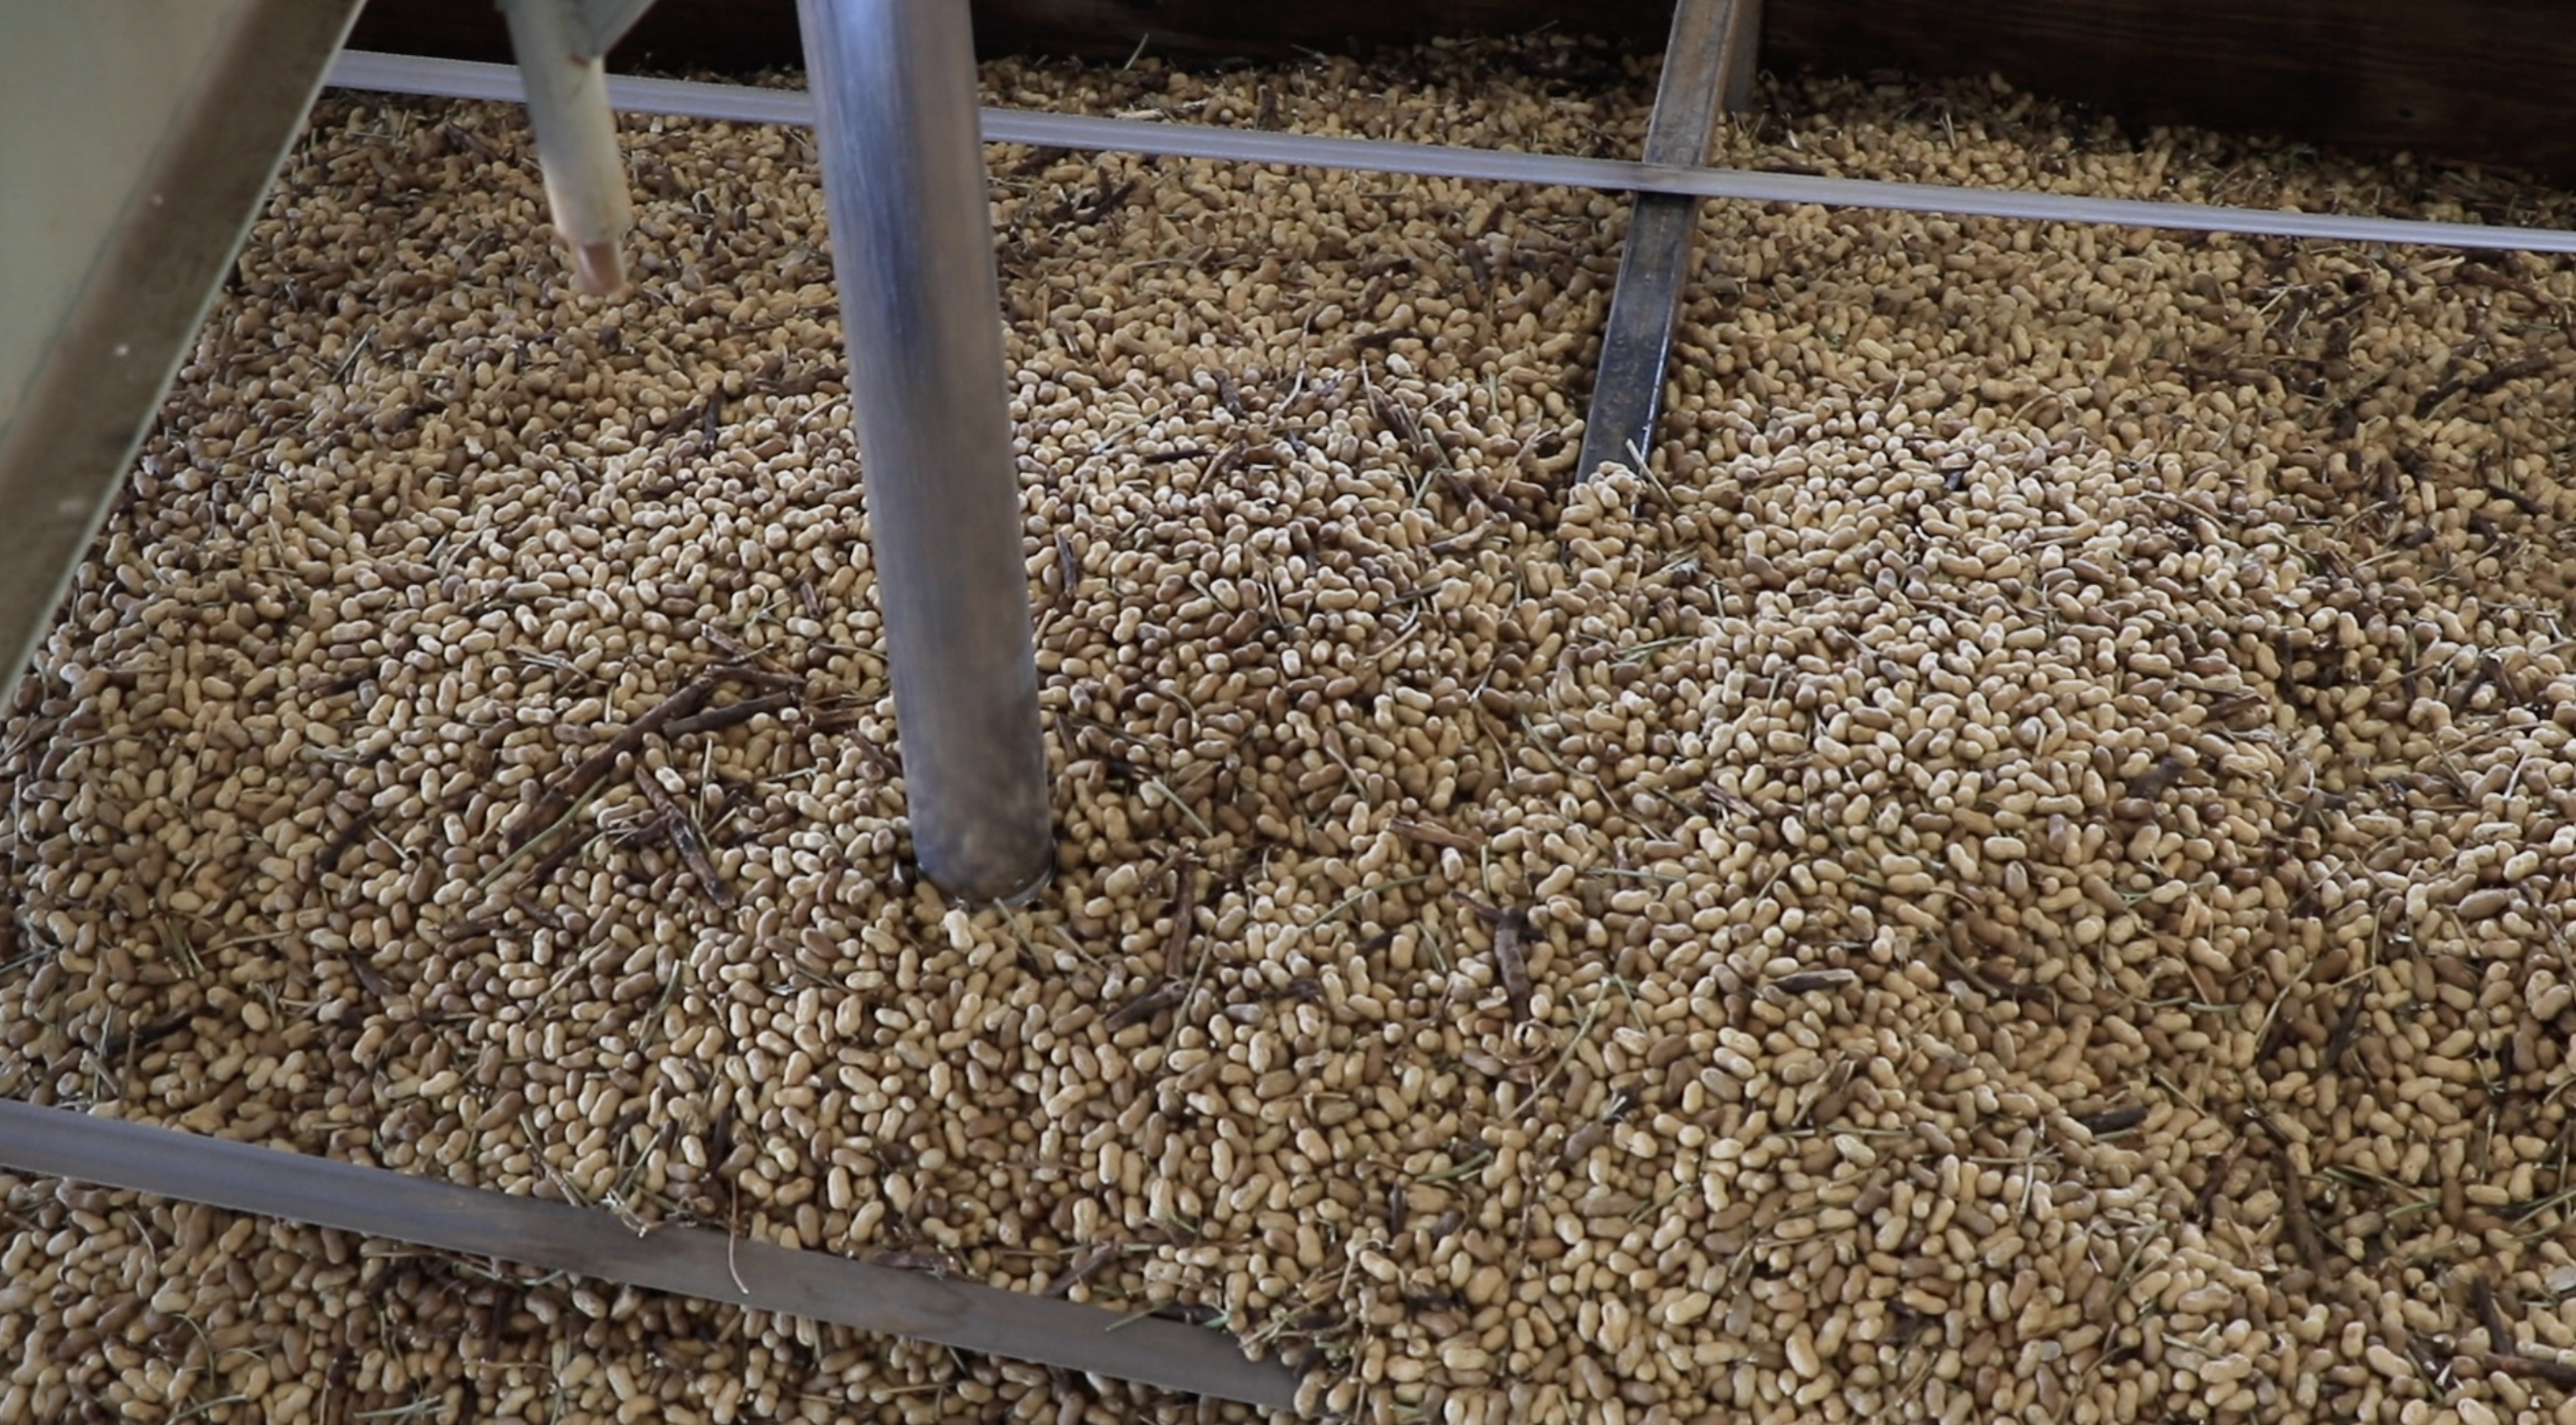 Bore samples are taken from a load of peanuts that have been moved from the warehous.